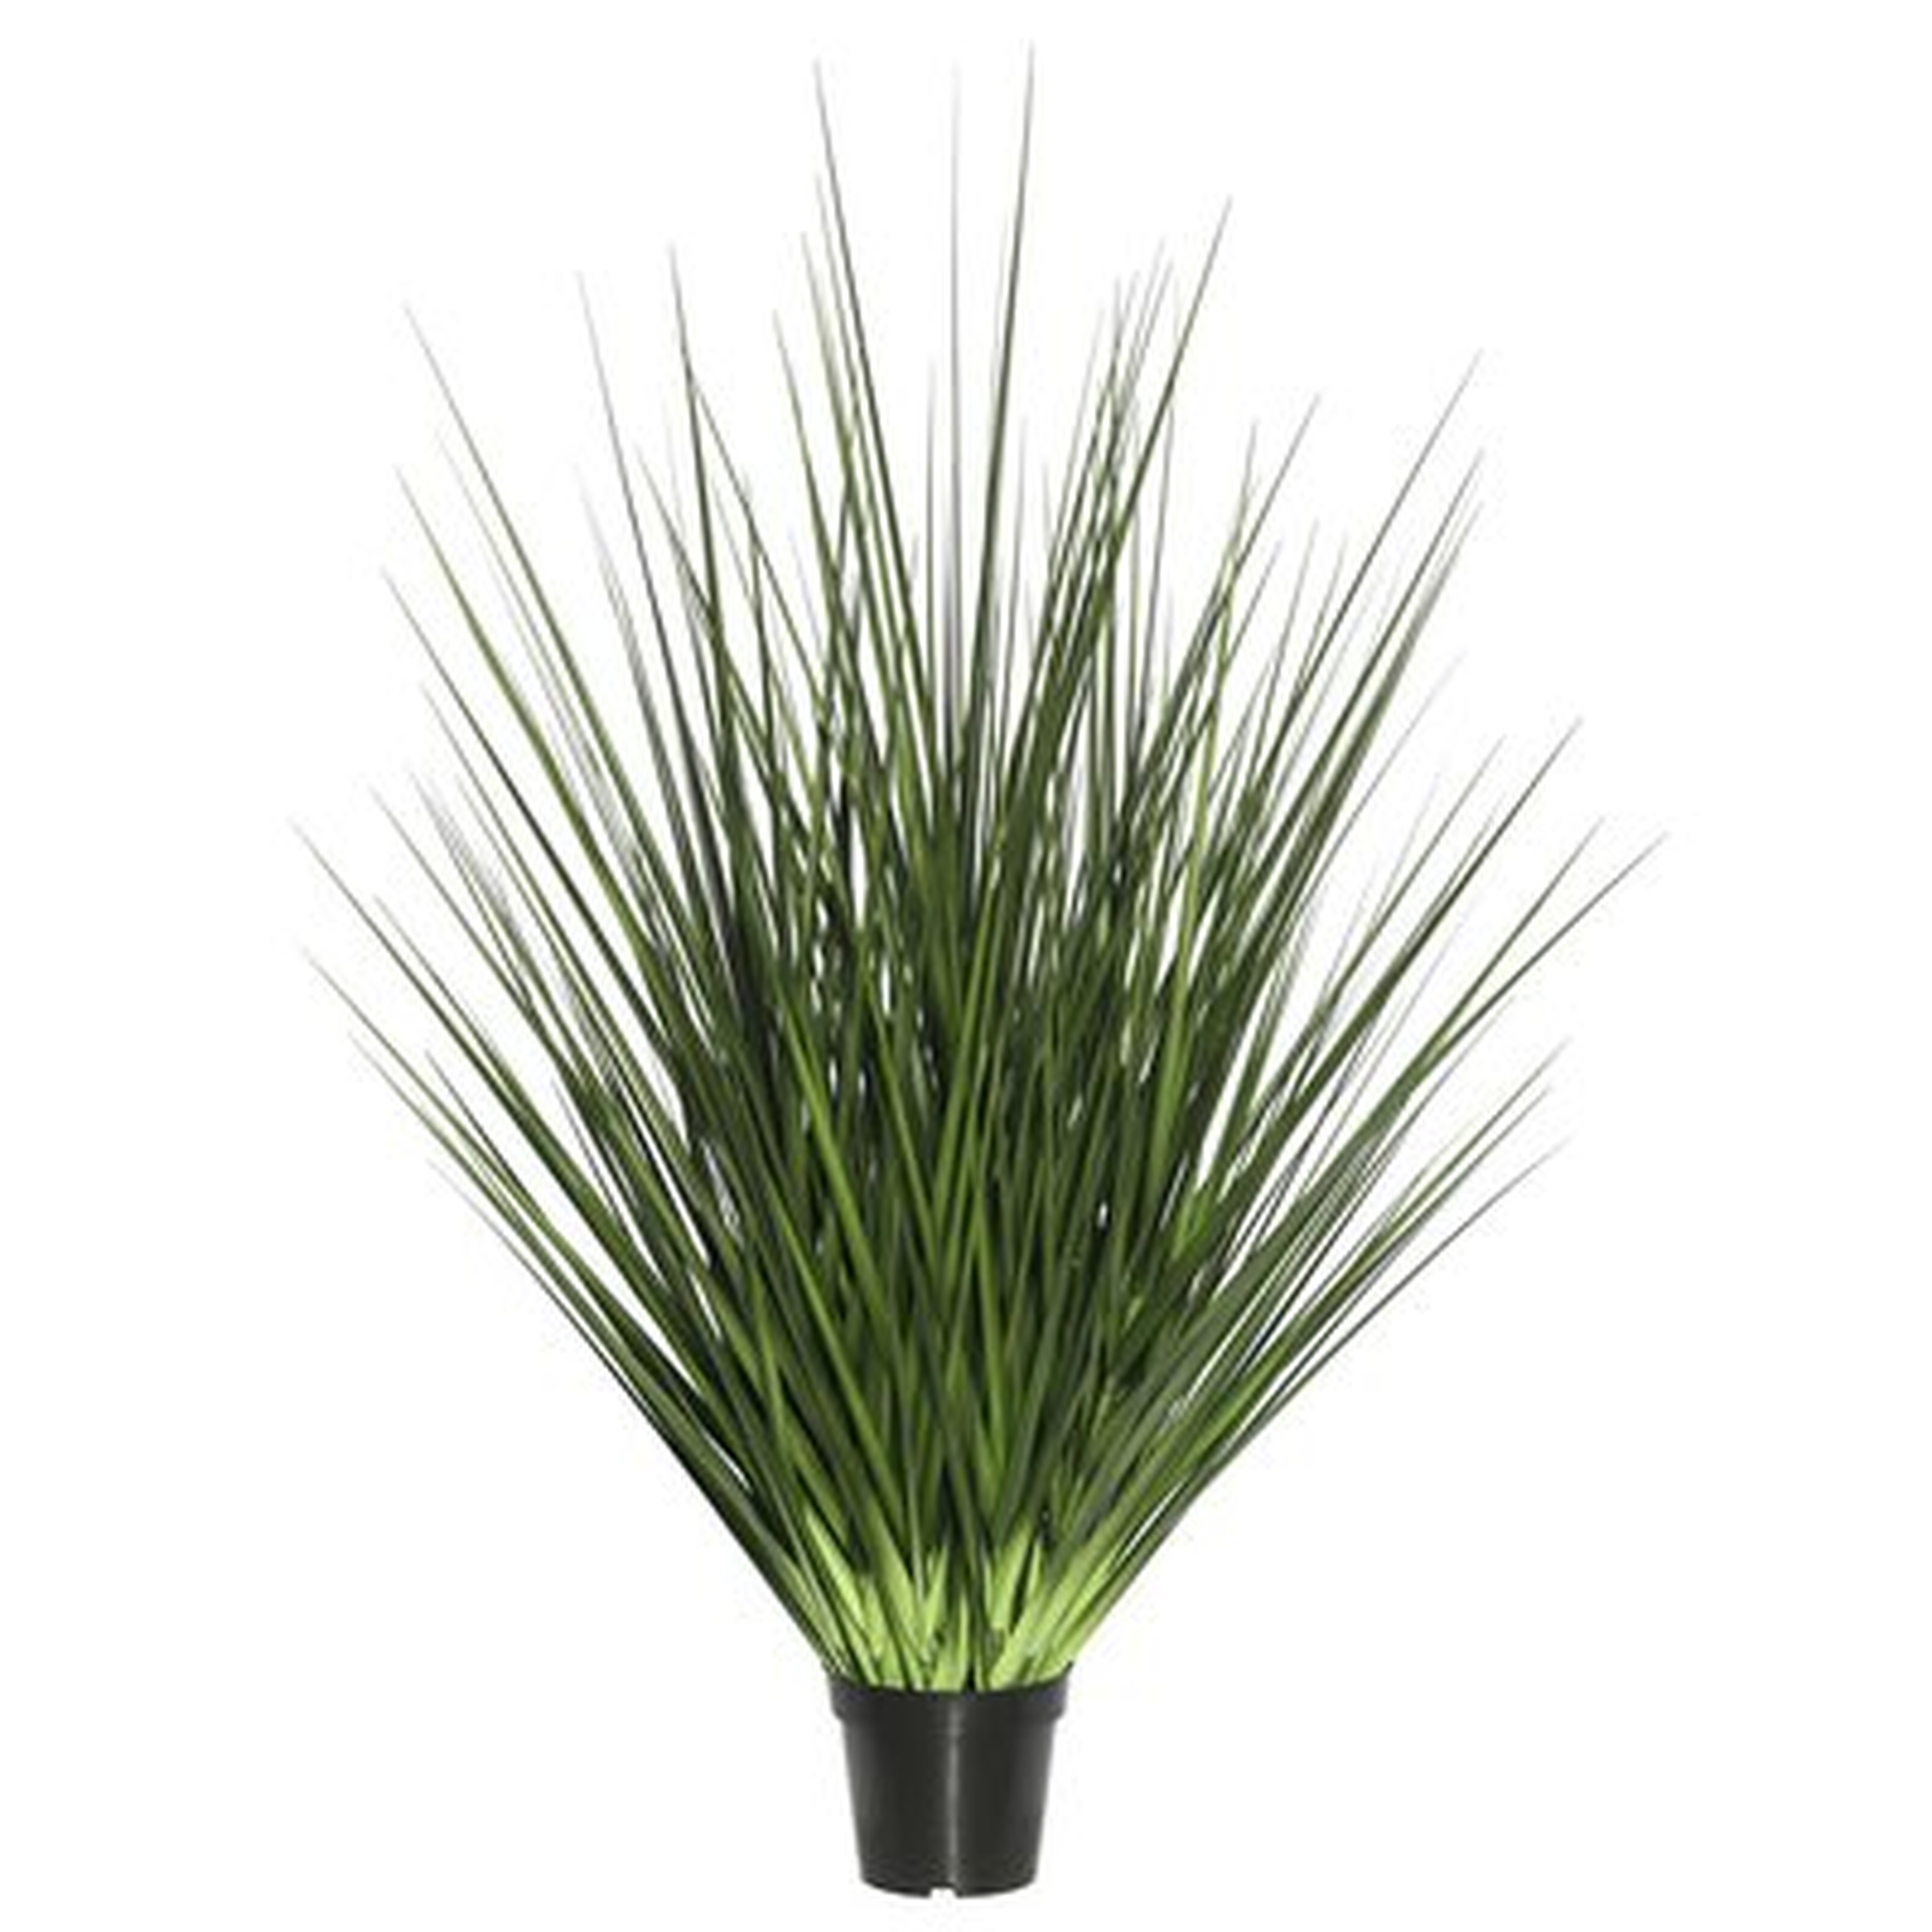 Artificial Potted Extra Full Floor Foliage Grass in Pot - Wayfair